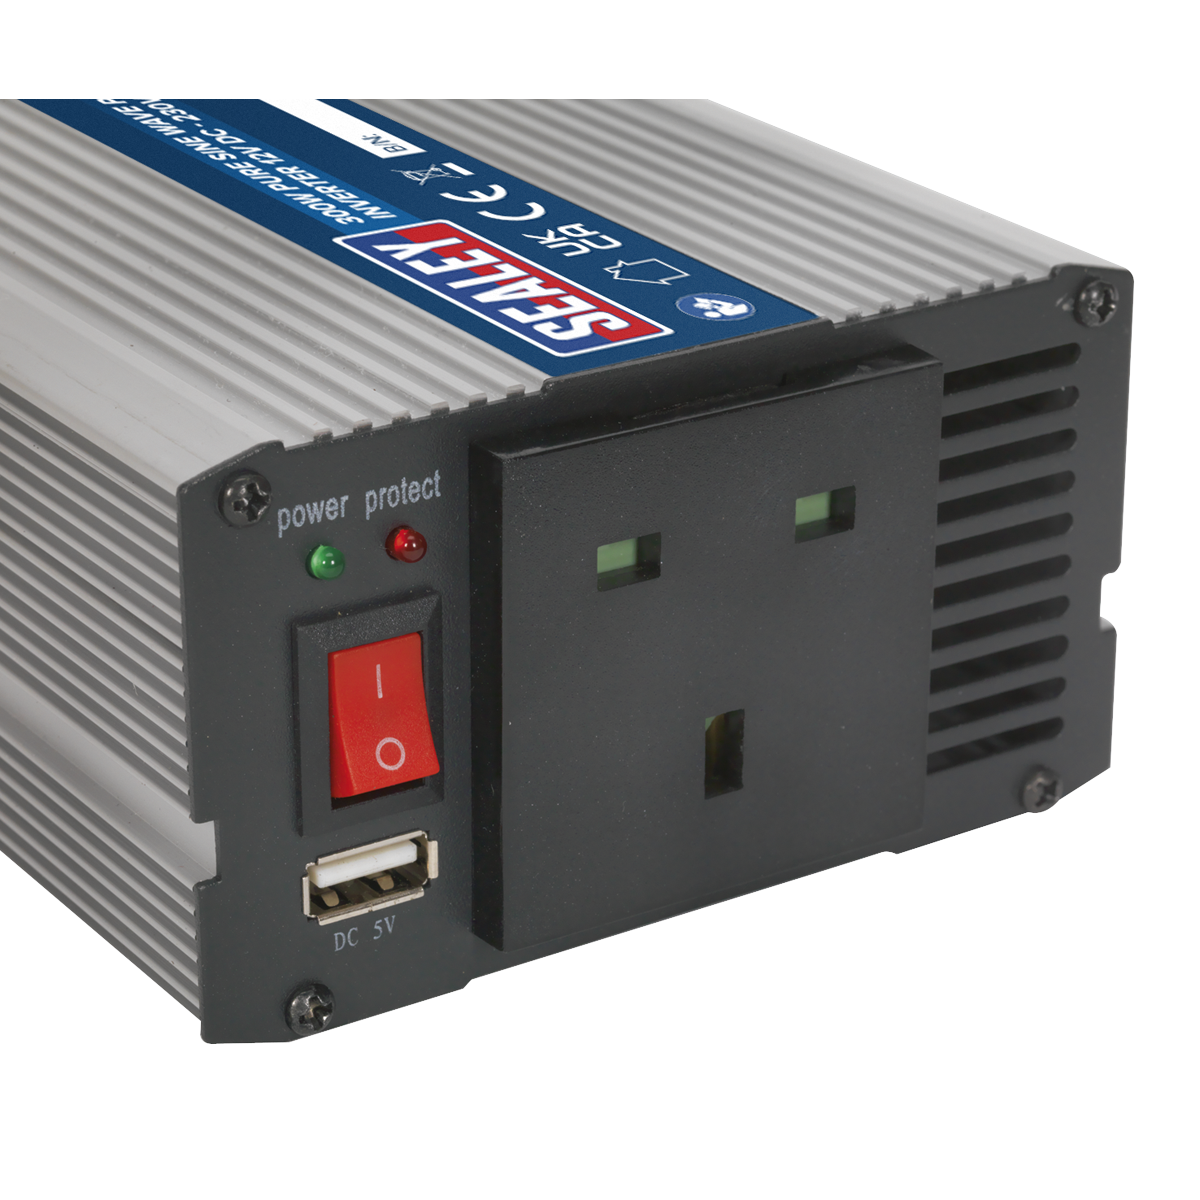 Operates from a 12V DC power supply found in cars, caravans, boats and commercials.